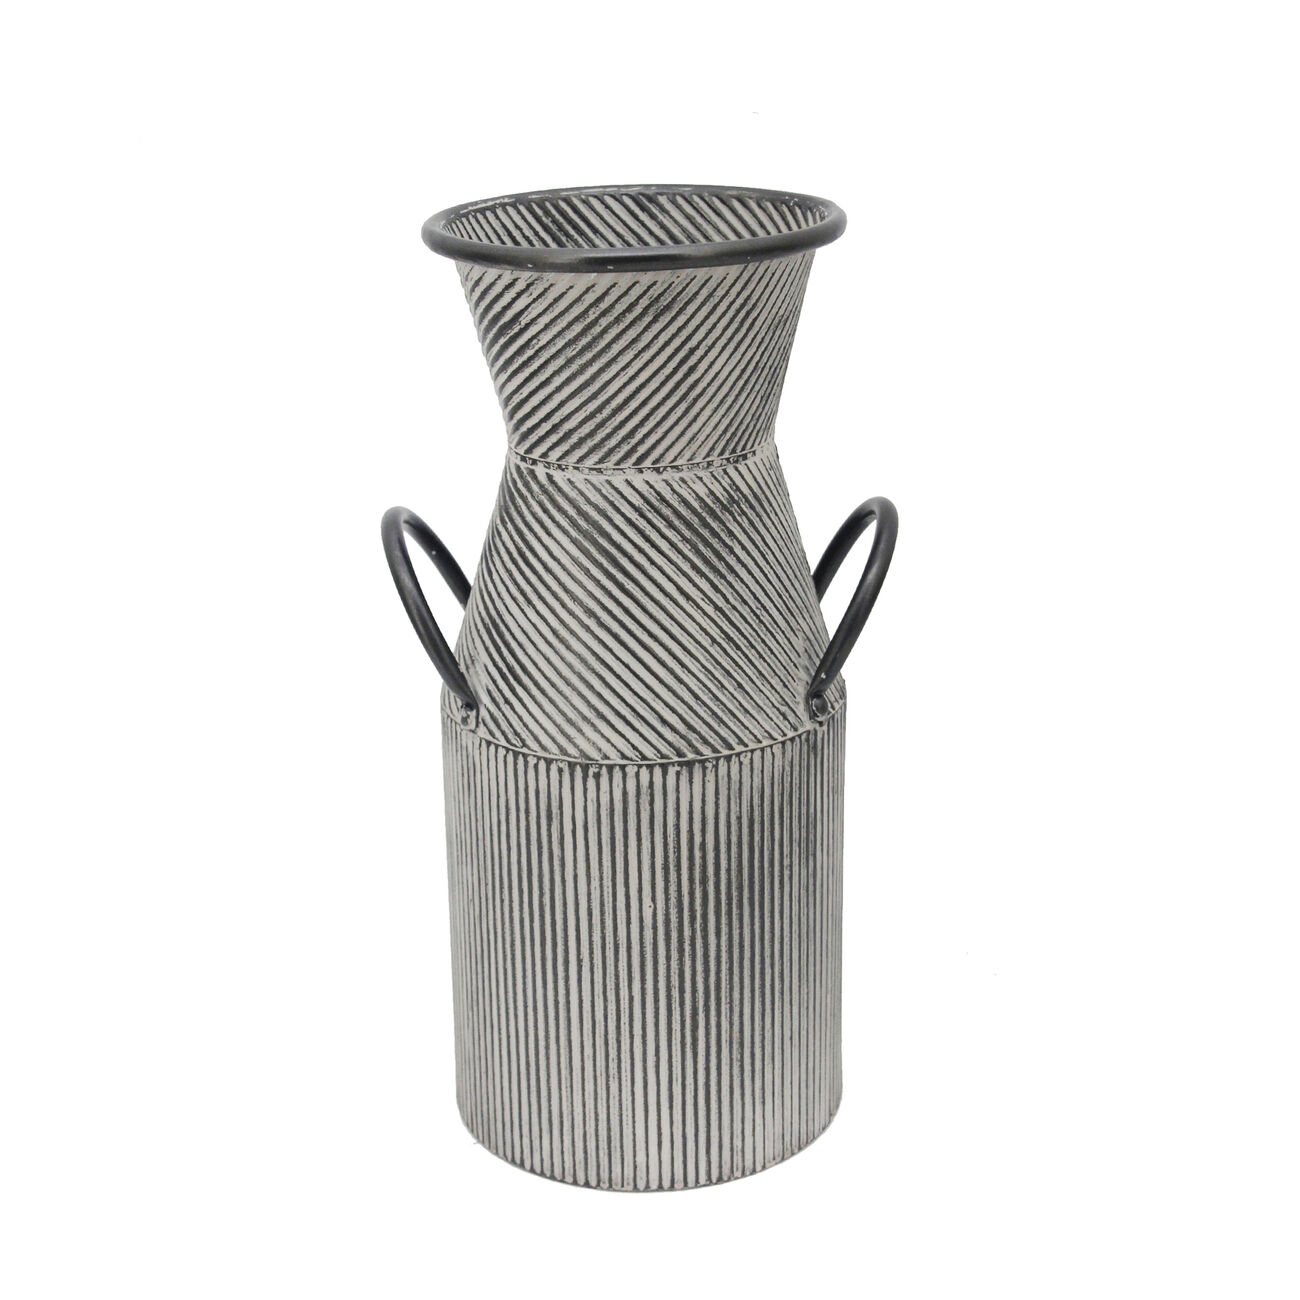 14 Inch Metal Milk Jar Accent Decor with Flared Opening and Banded Top,Gray